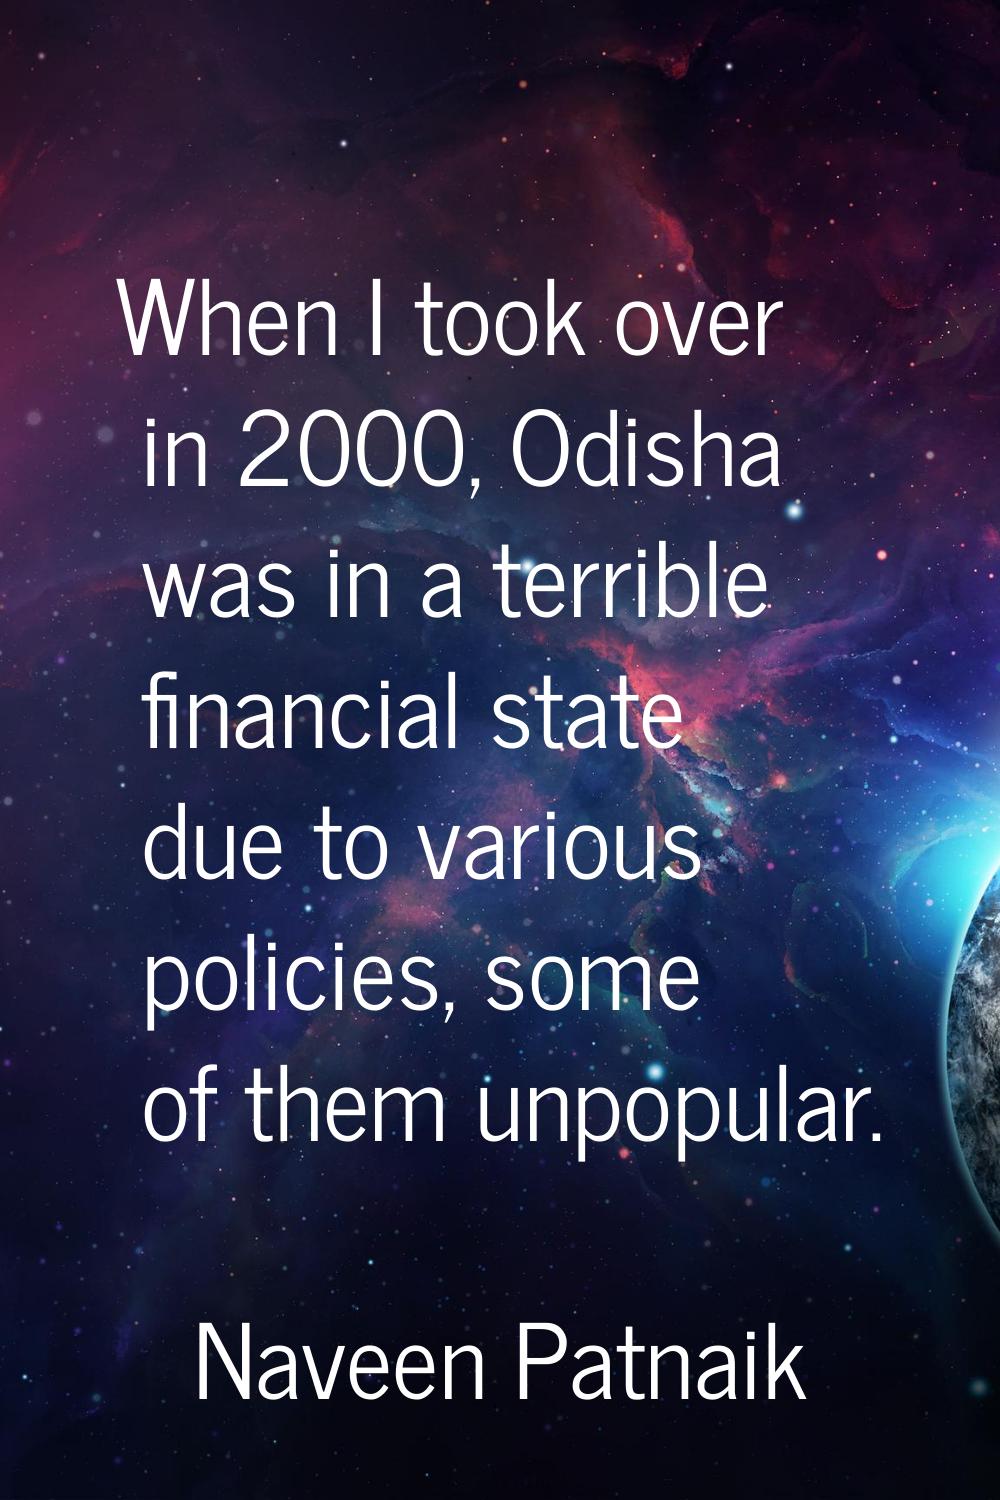 When I took over in 2000, Odisha was in a terrible financial state due to various policies, some of